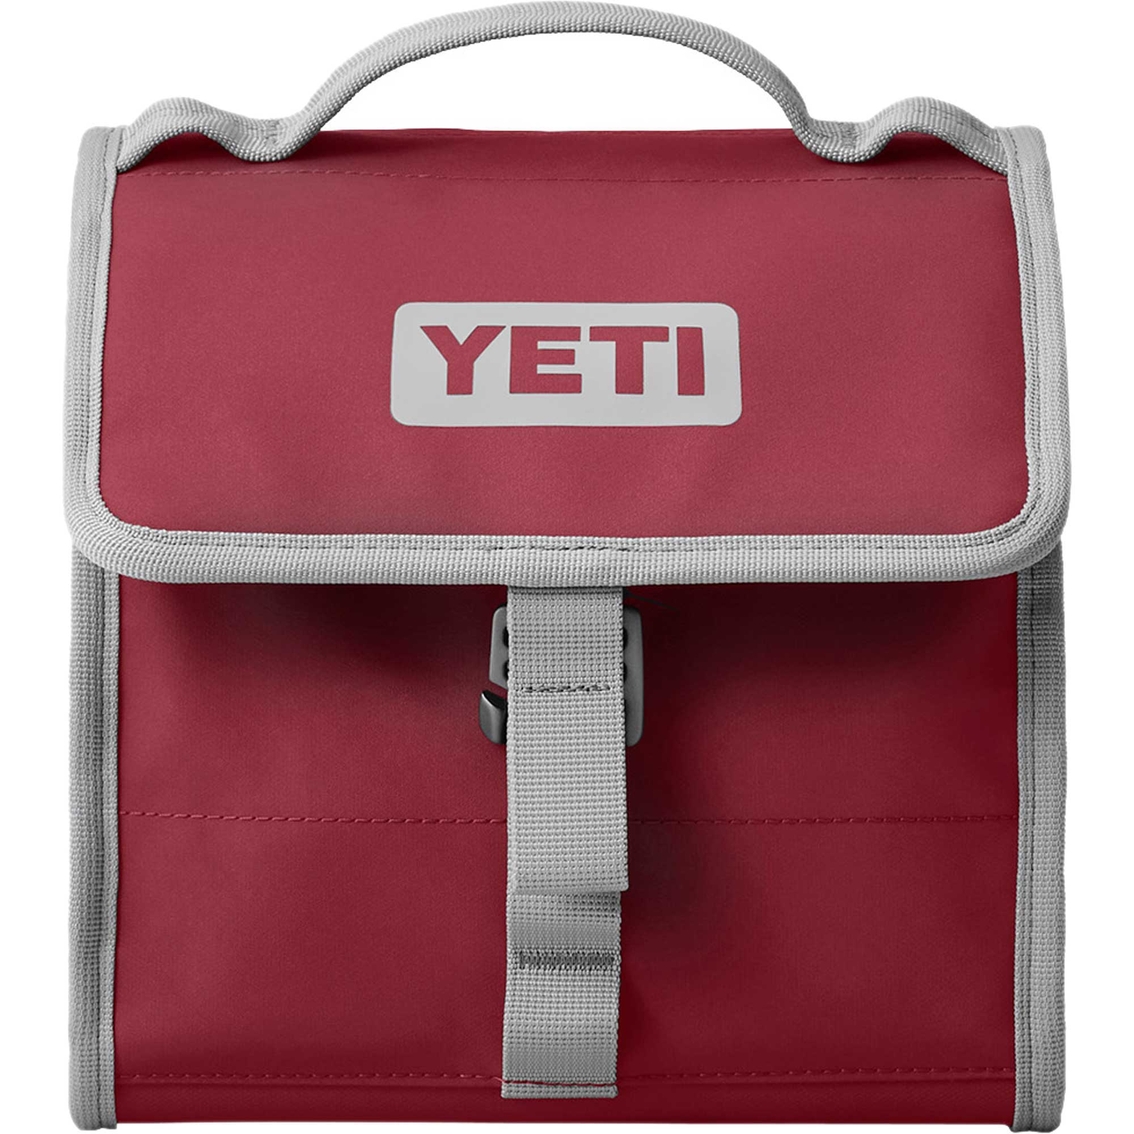  YETI Daytrip Packable Lunch Bag, Navy: Home & Kitchen